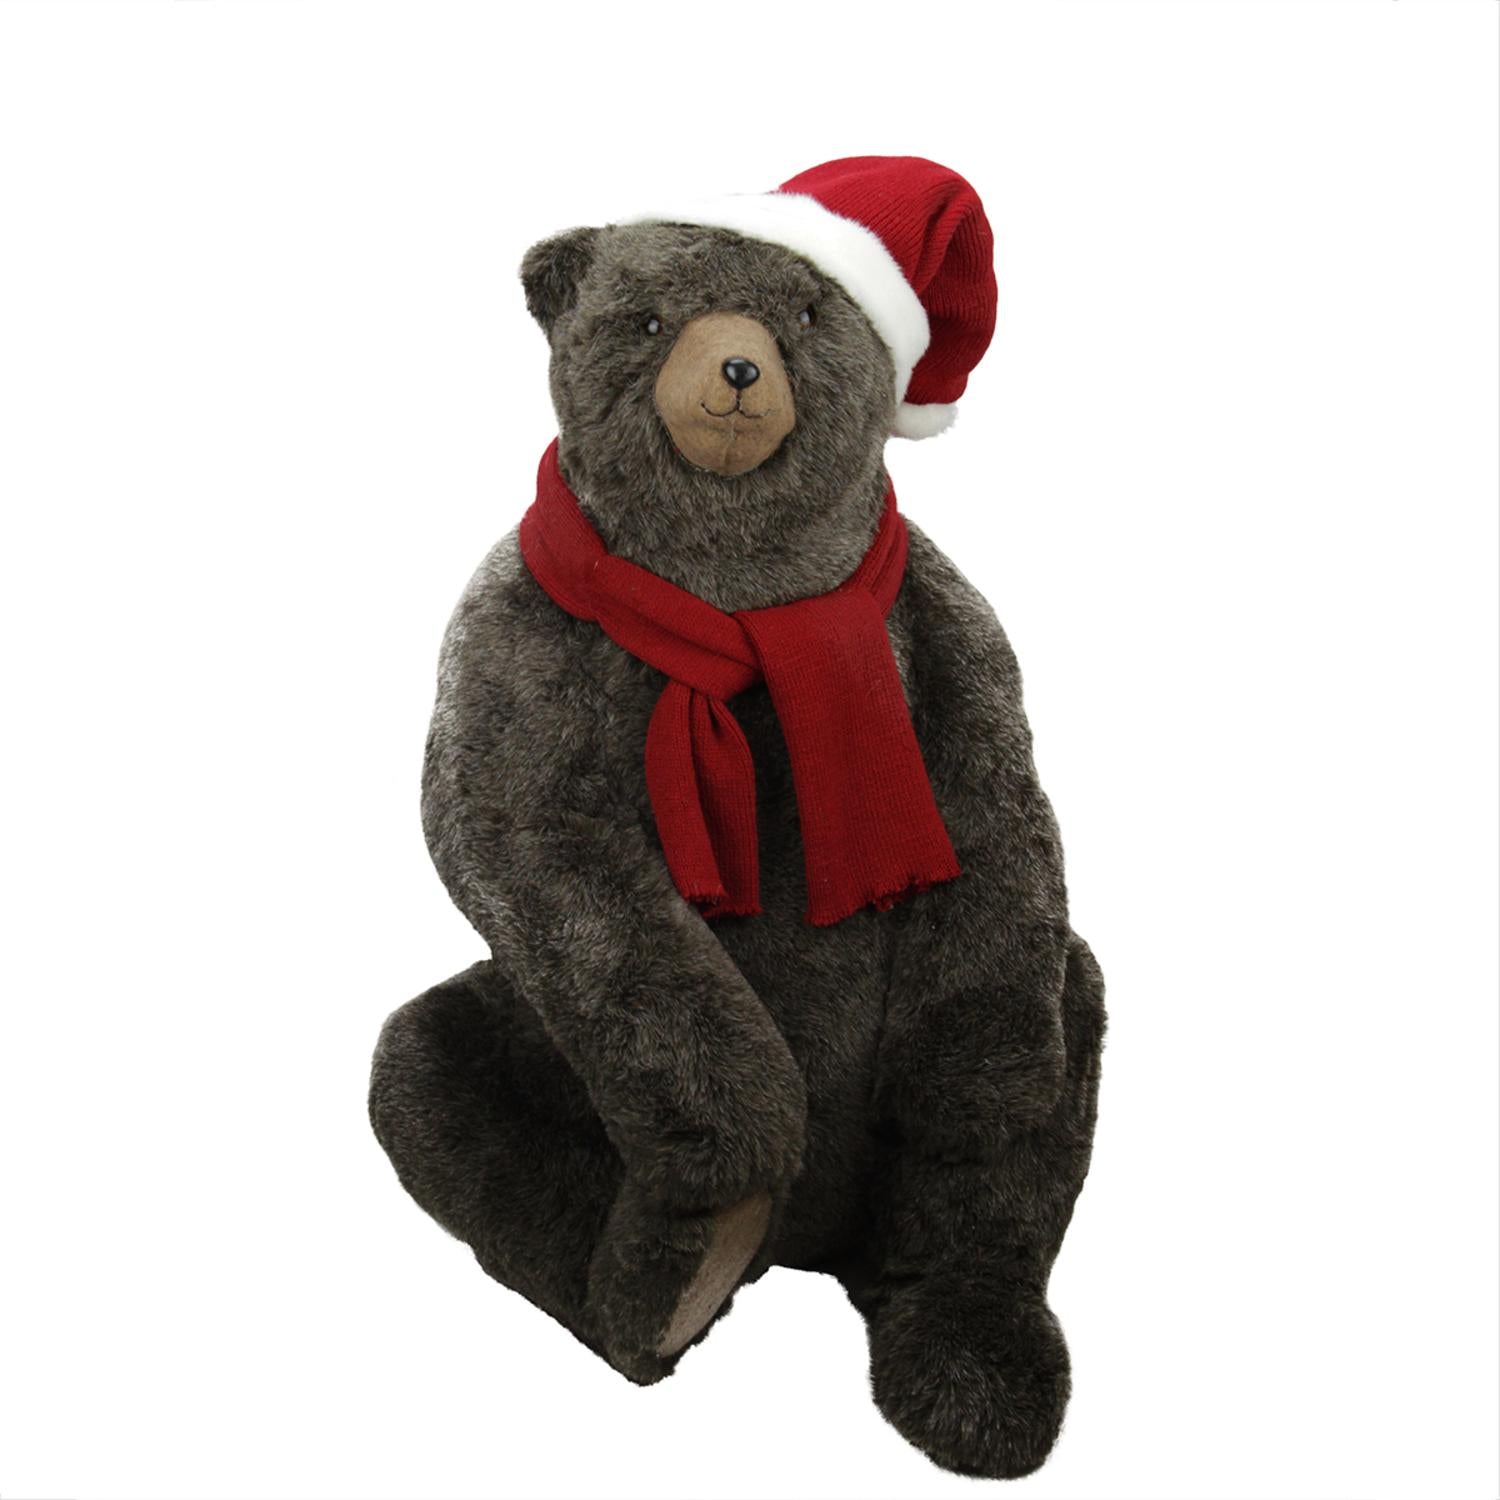 36" Sitting Plush Brown Bear Christmas Decoration Wearing Hat and Scarf